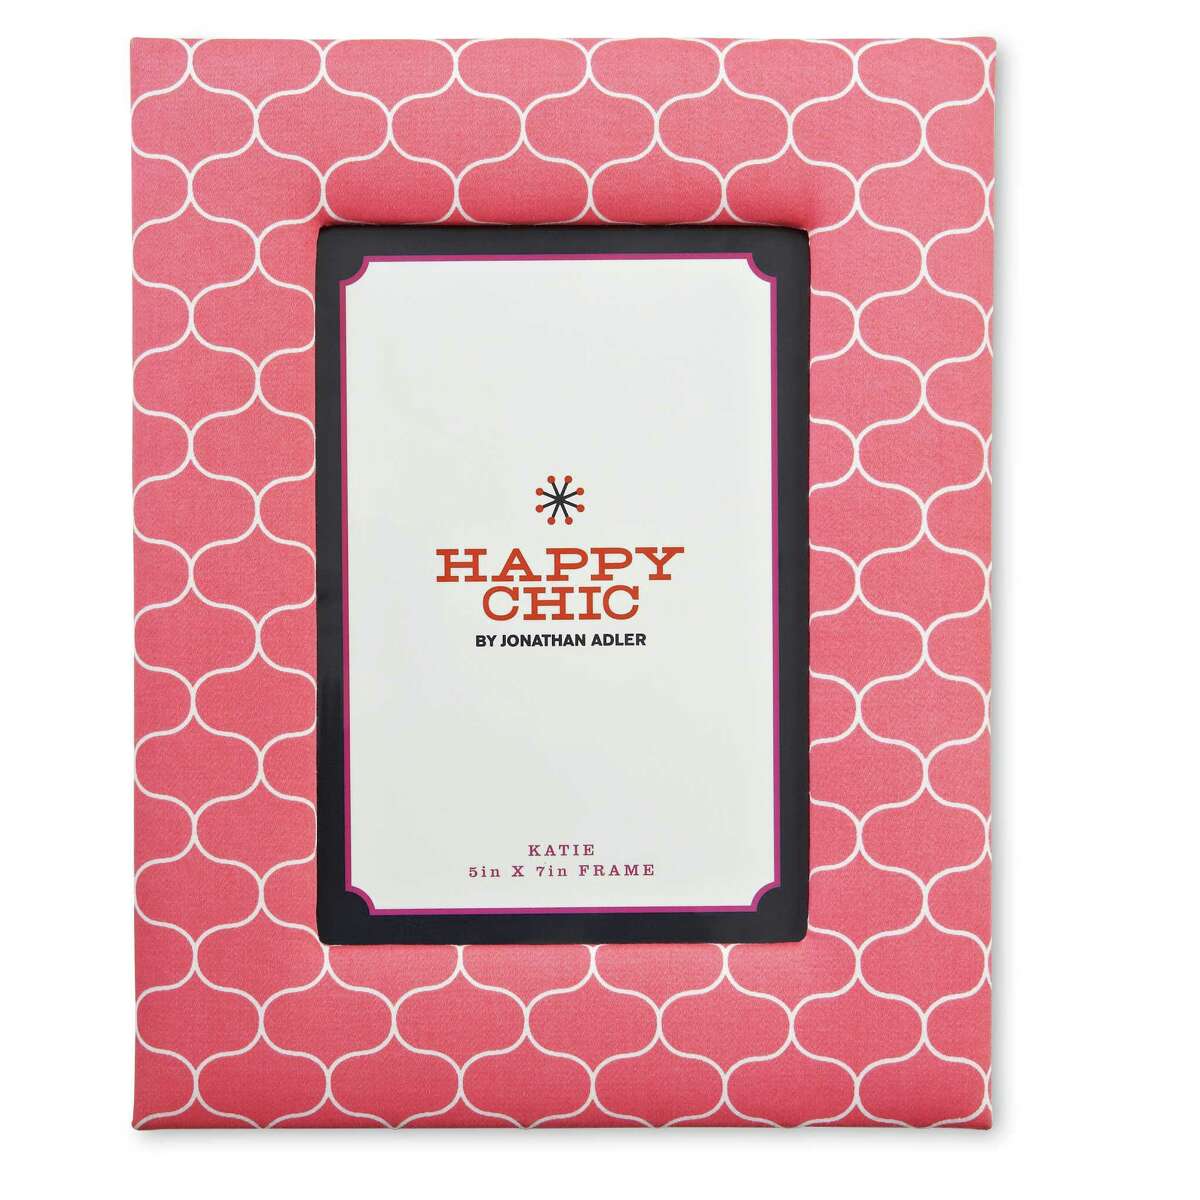 Happy Chic by Jonathan Adler Elizabeth fabric picture frame, $15 at JC Penney 719-1057